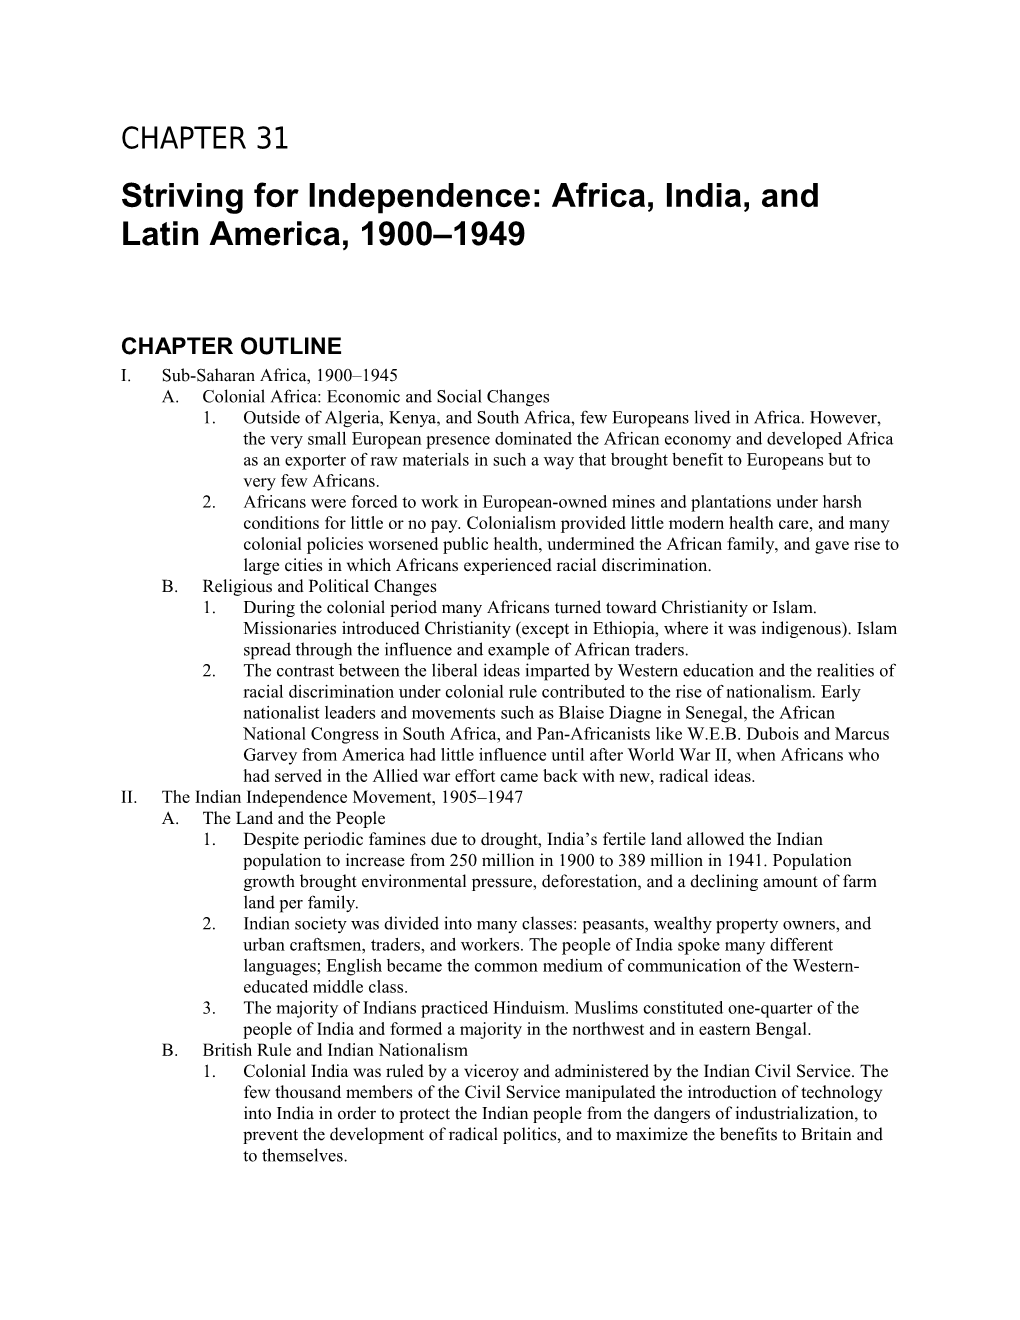 Striving for Independence: Africa, India, and Latin America, 1900 1949